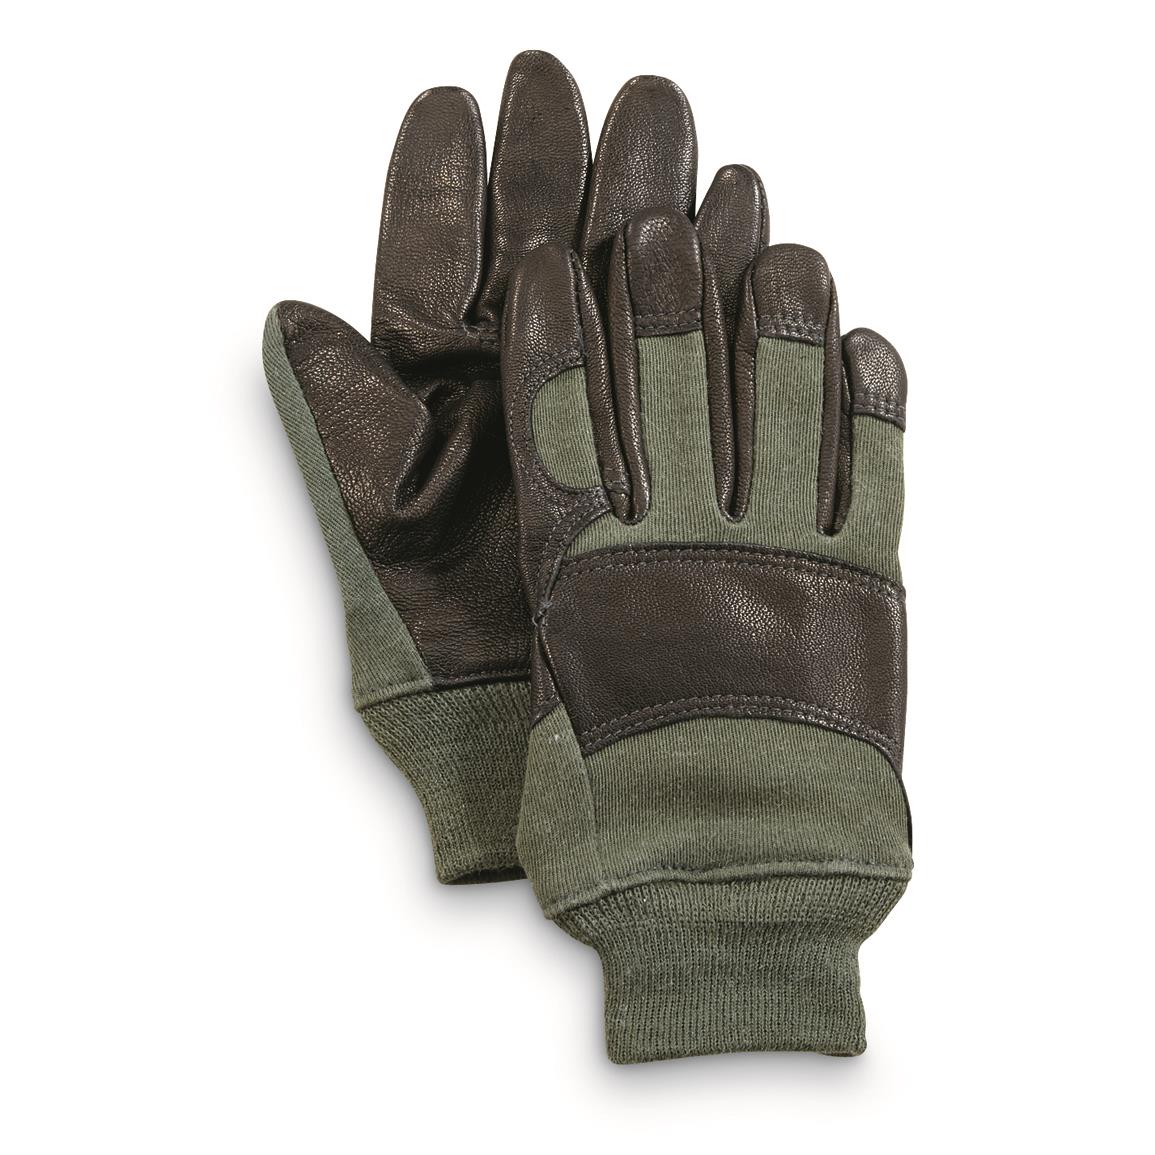 Hank's Surplus Military Tactical Shooting Leather Nomex Gloves 